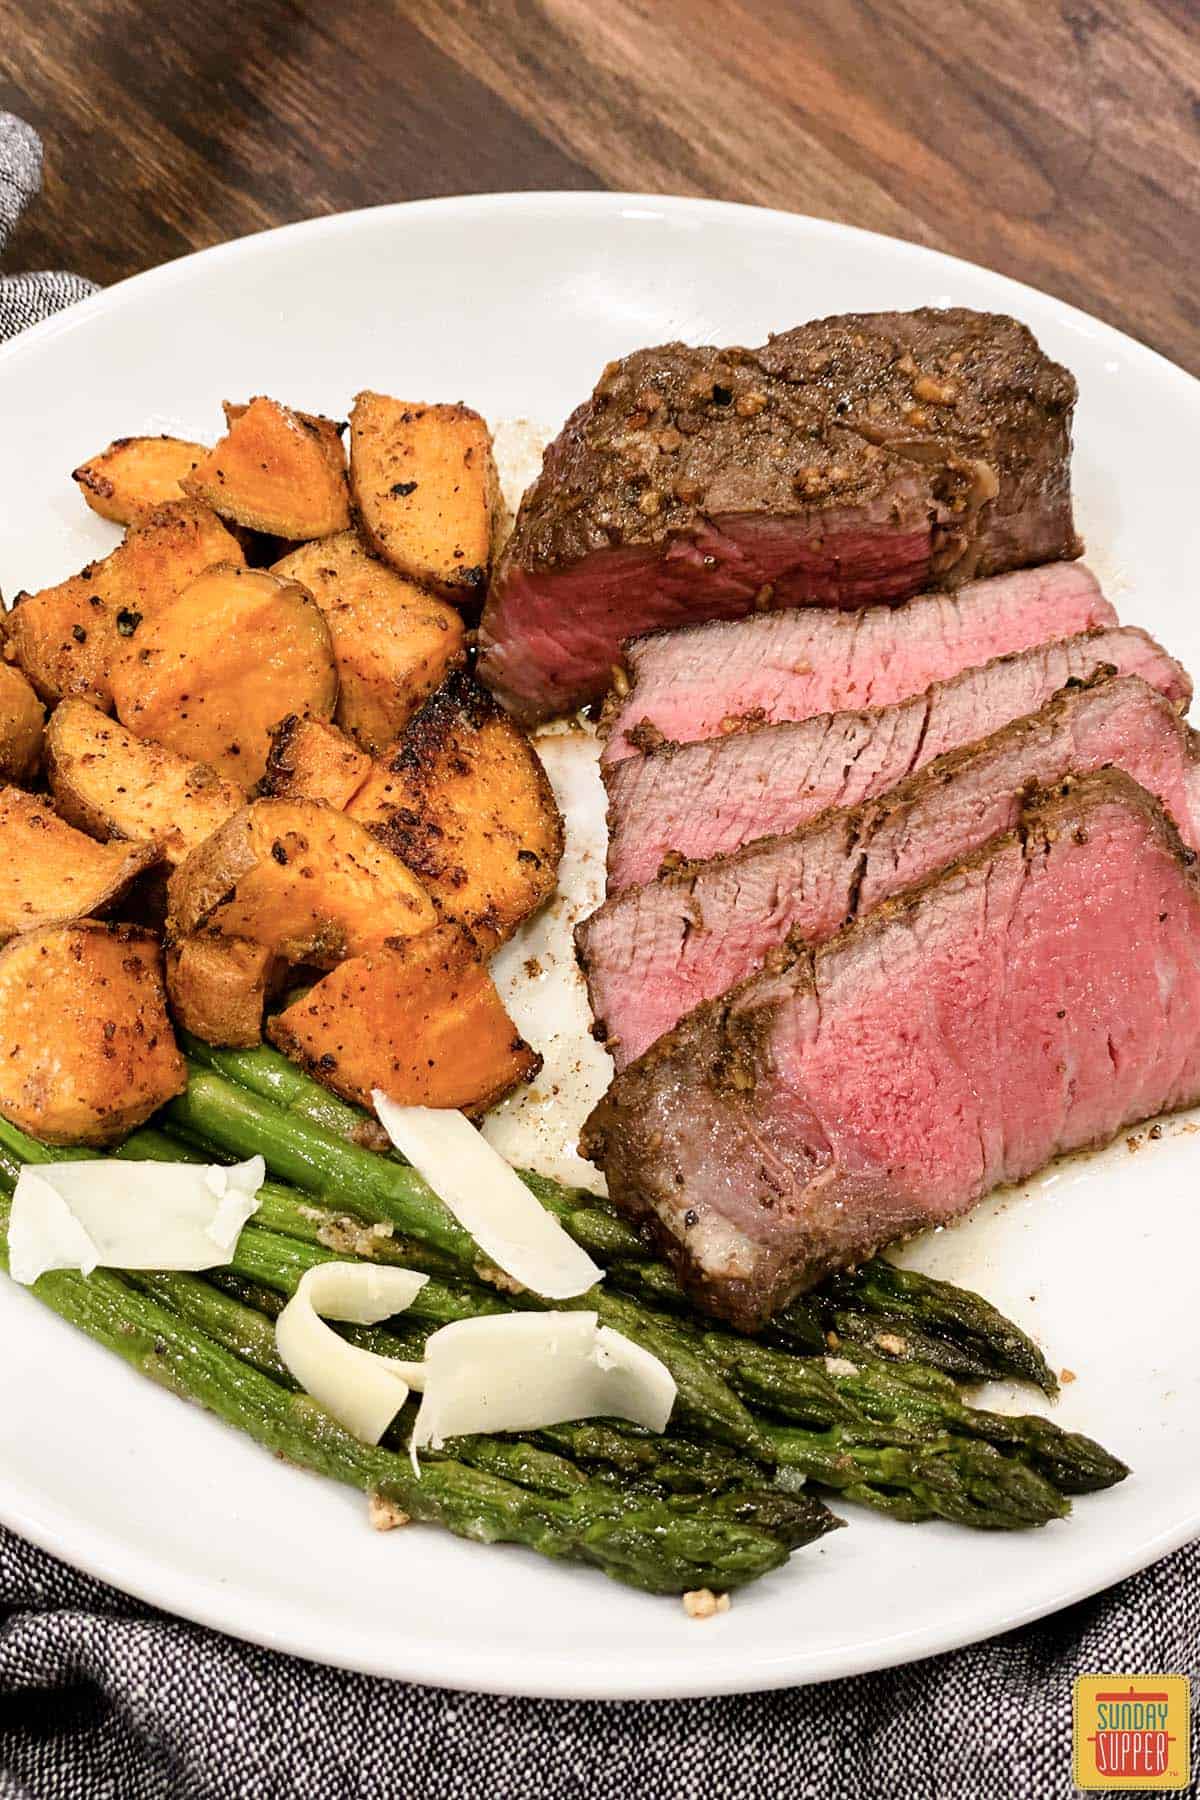 slices of sous vide filet mignon on a white plate with asparagus, sweet potatoes, and freshly grated parmesan